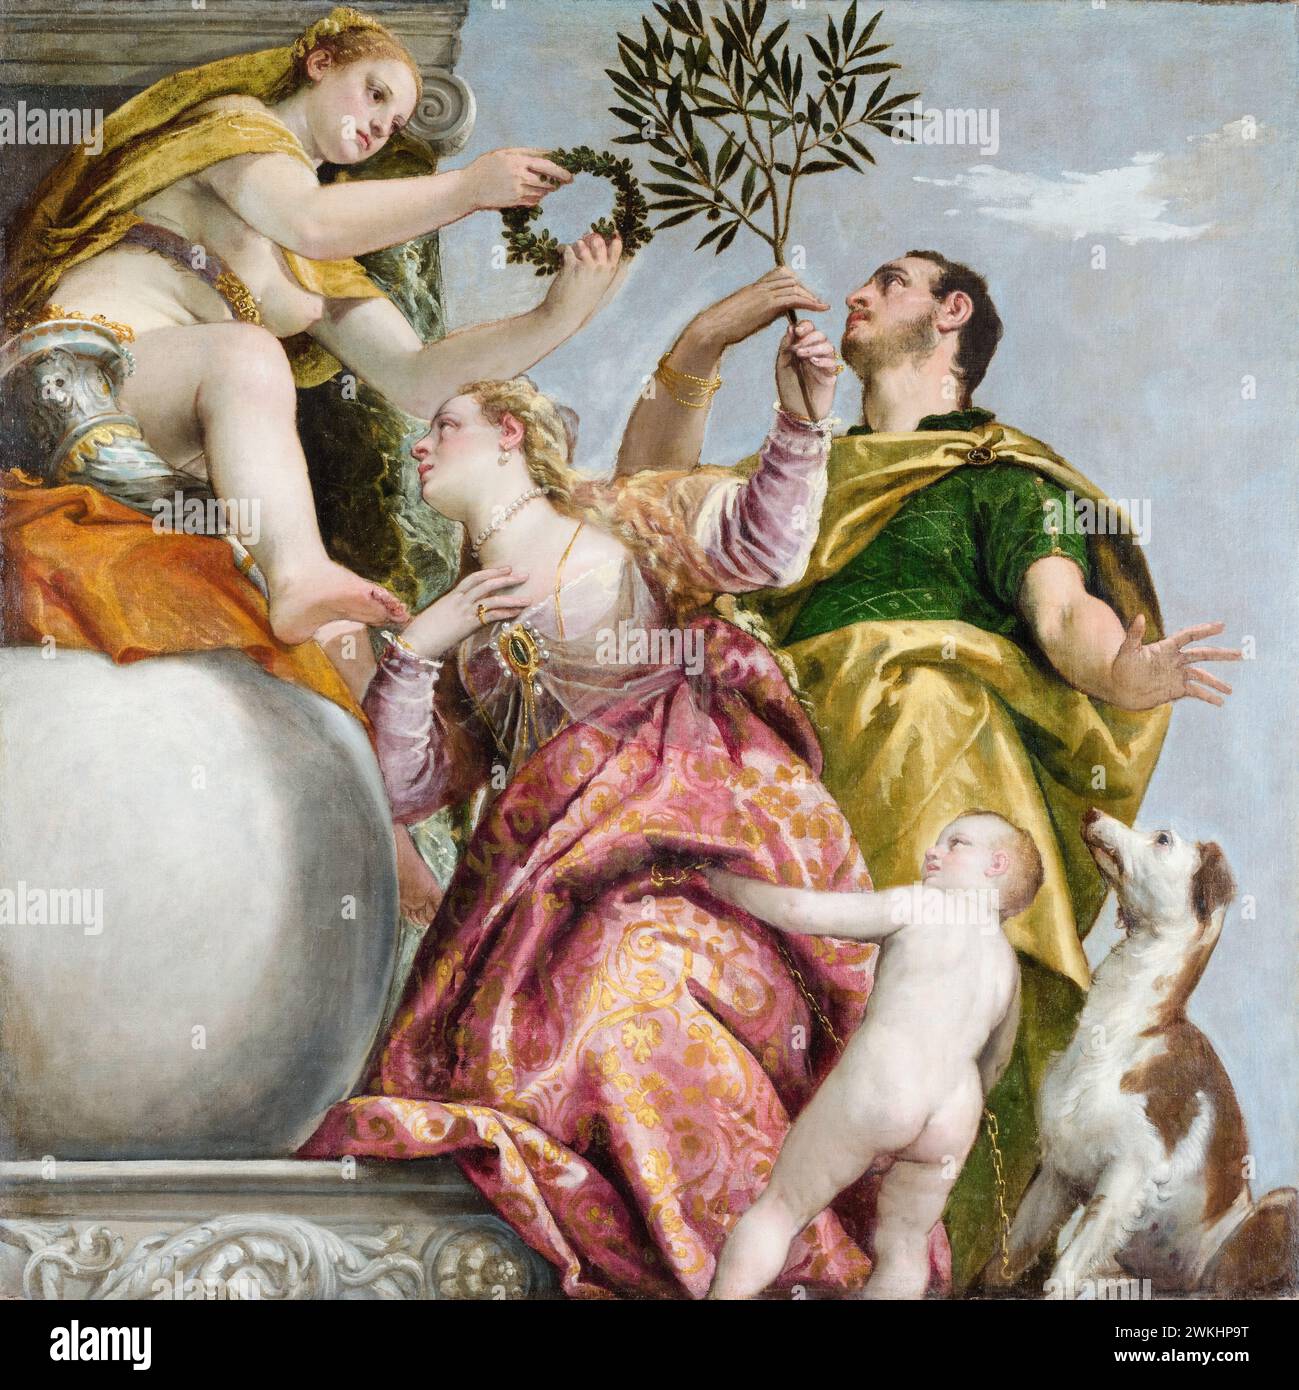 Paolo Veronese, Four Allegories of Love: Happy Union, painting in oil on canvas, circa 1575 Stock Photo